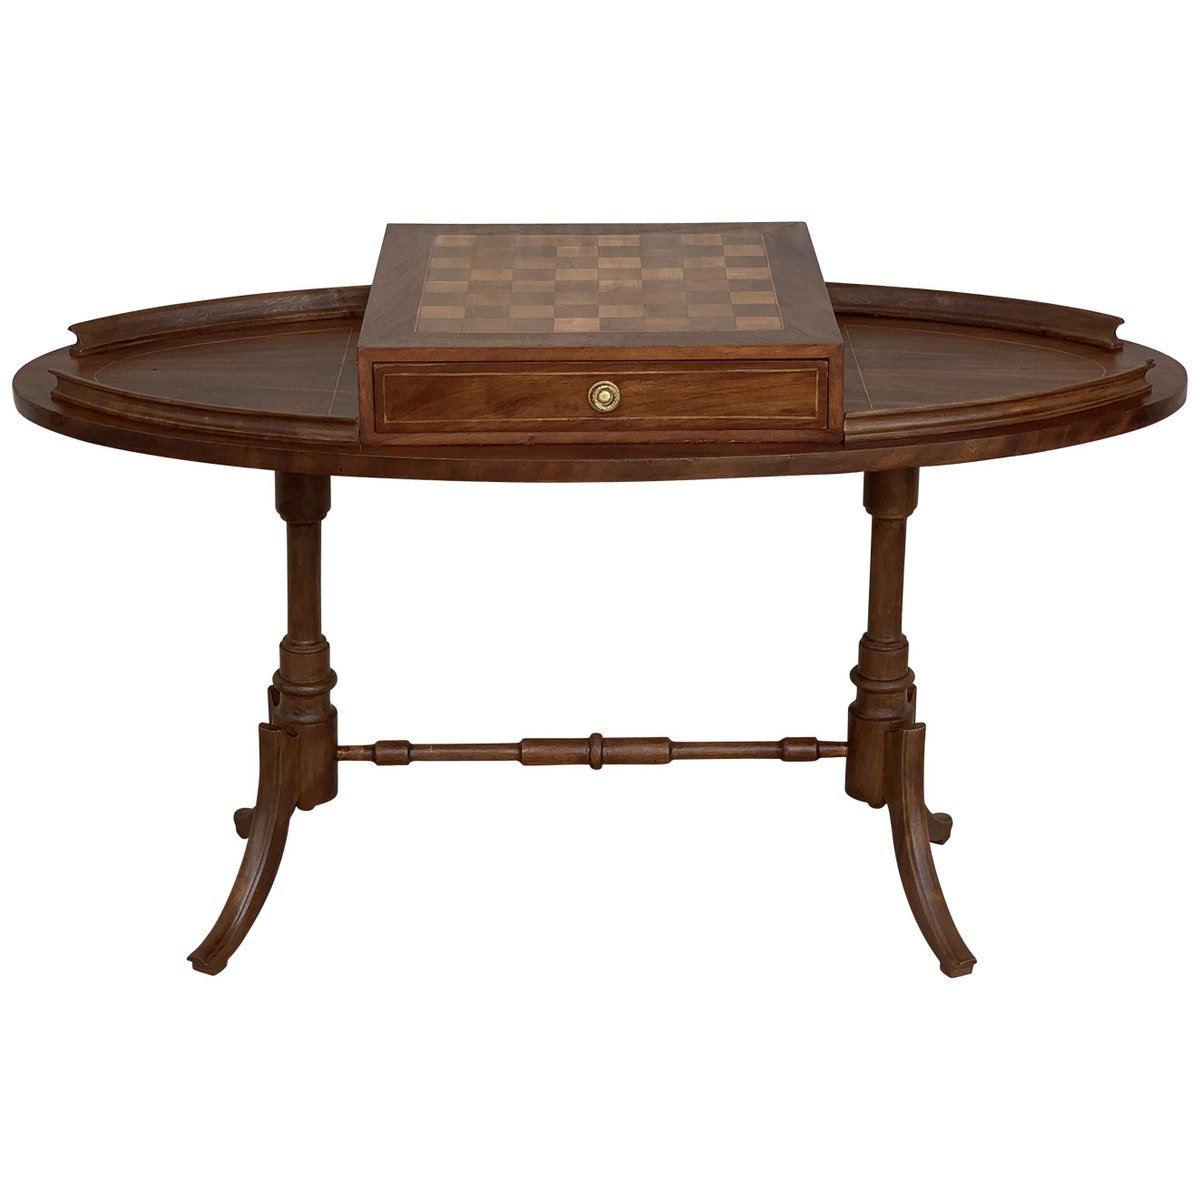 20th century regency style oval walnut chess game table with 2 drawers PSK-1003025